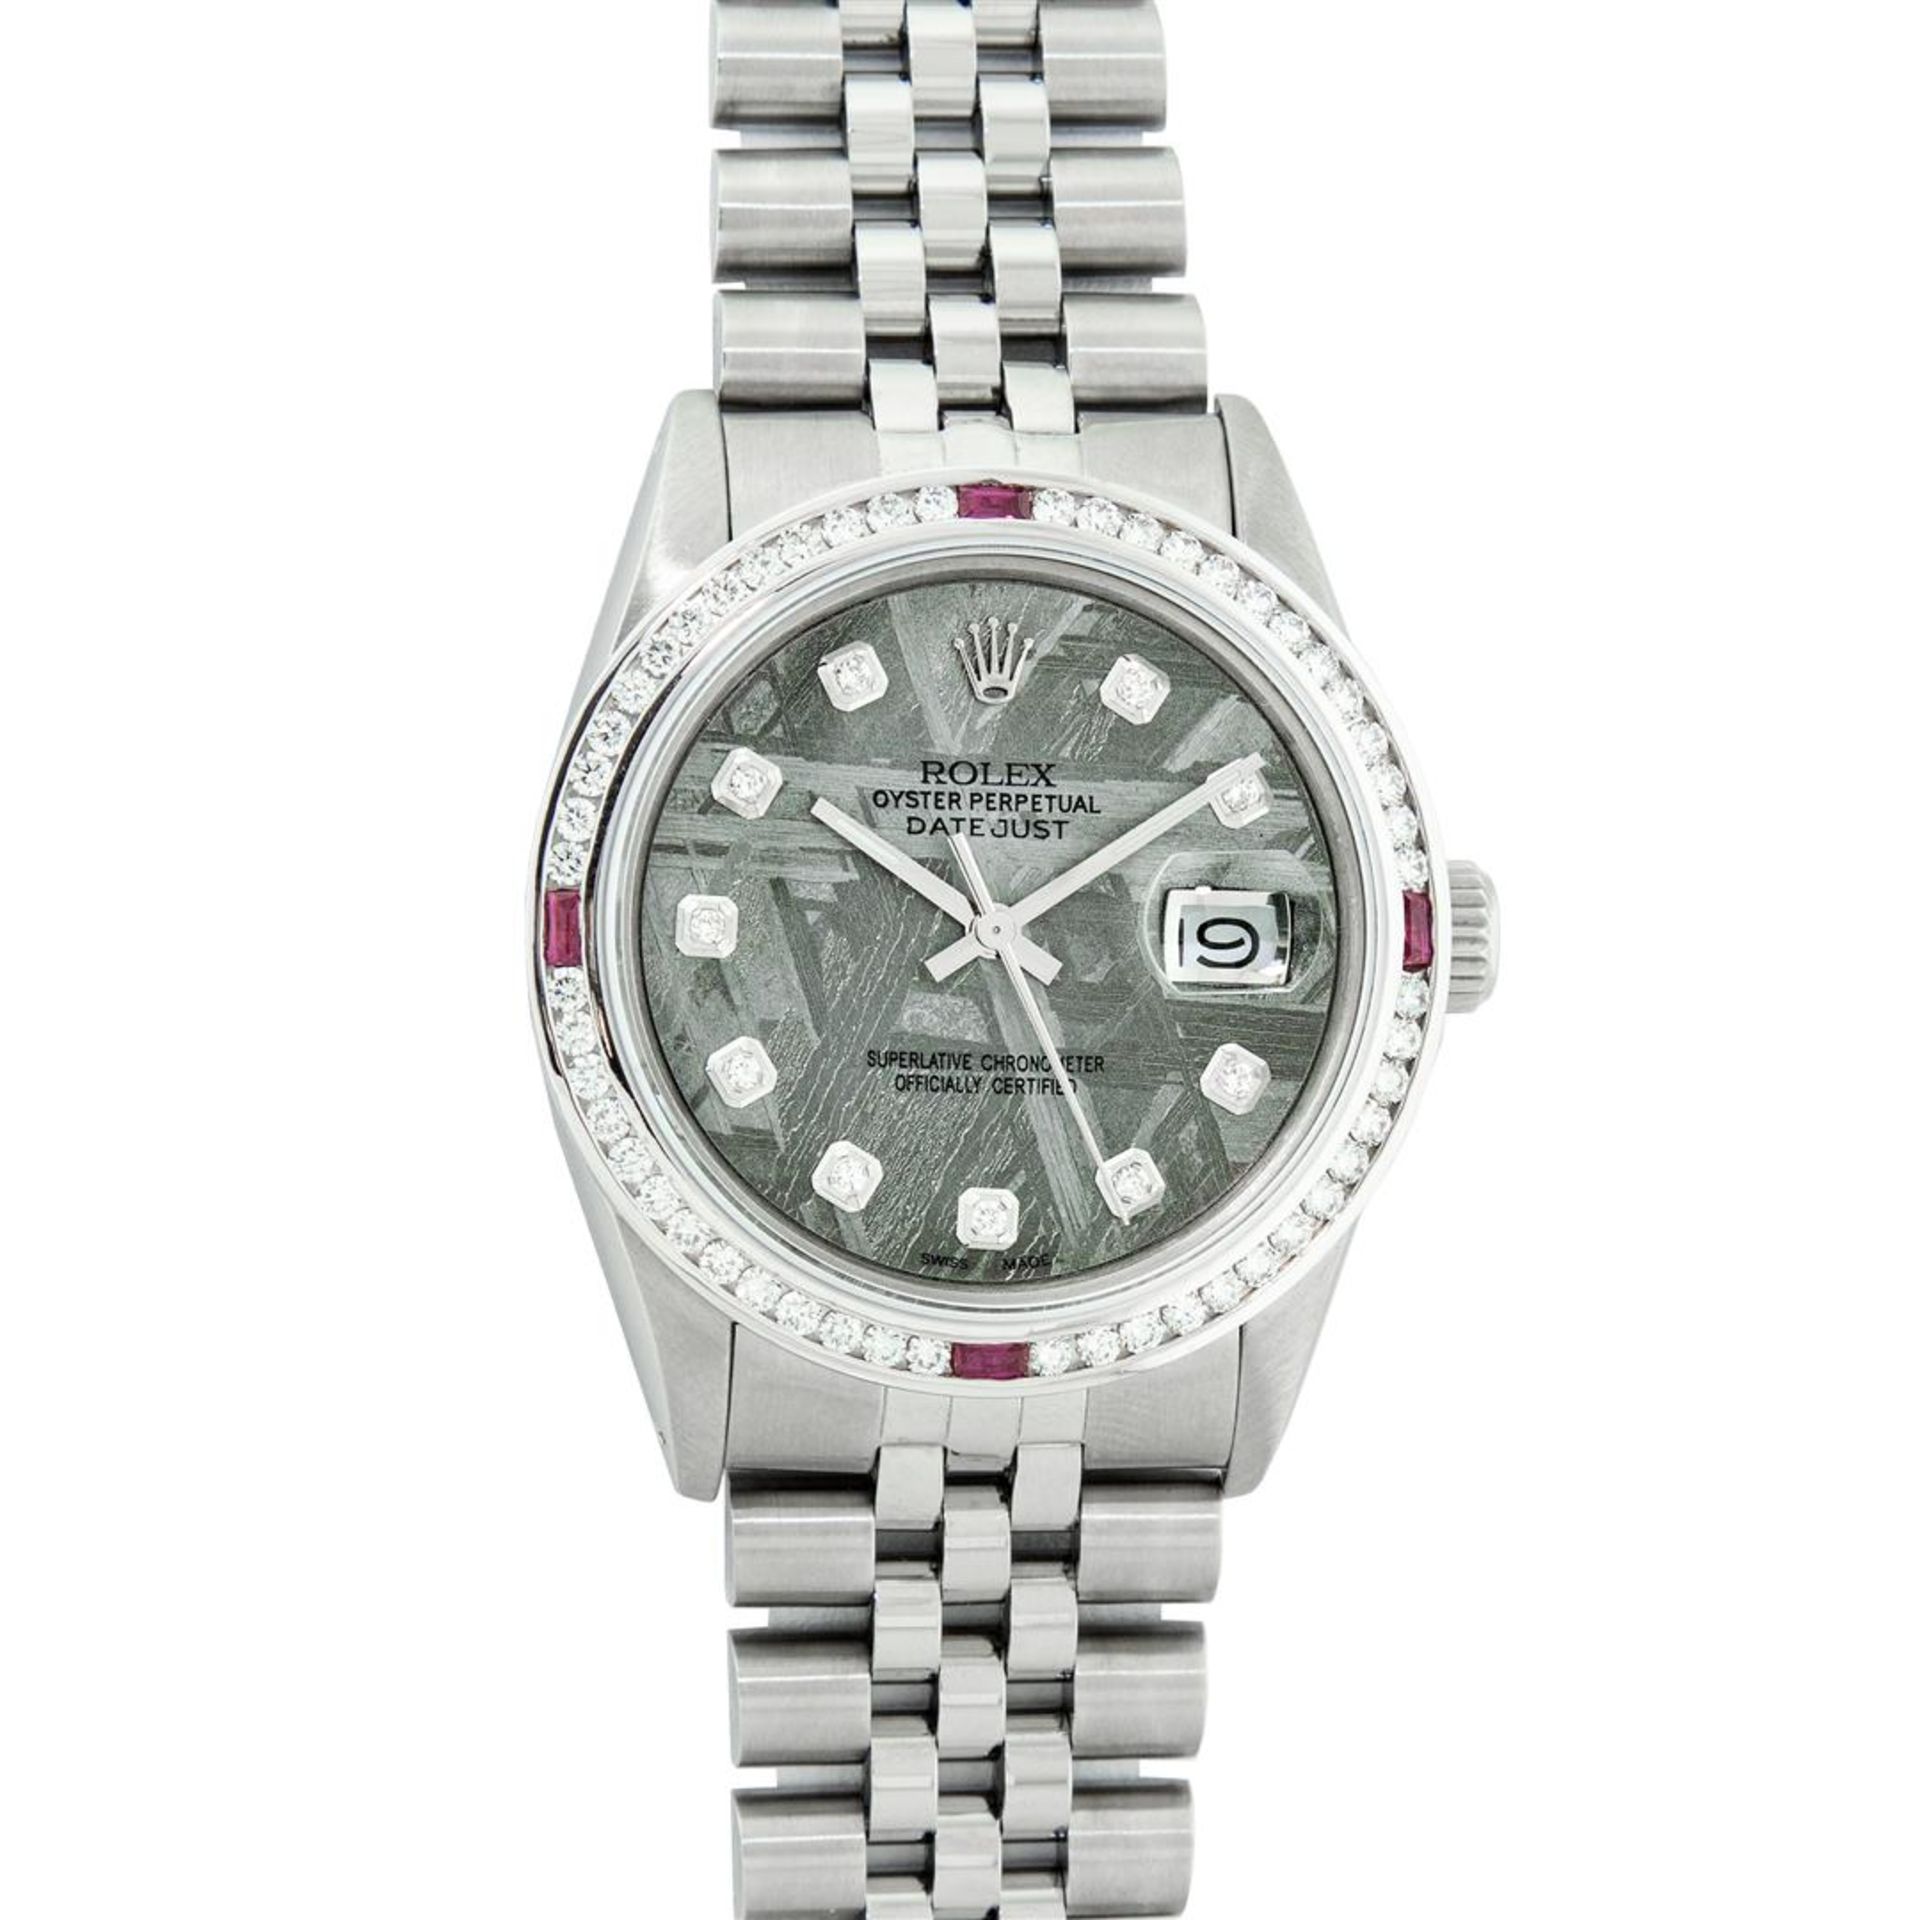 Rolex Mens SS Meteorite Diamond & Ruby Channel Set Oyster Perpetual Datejust Wri - Image 2 of 9